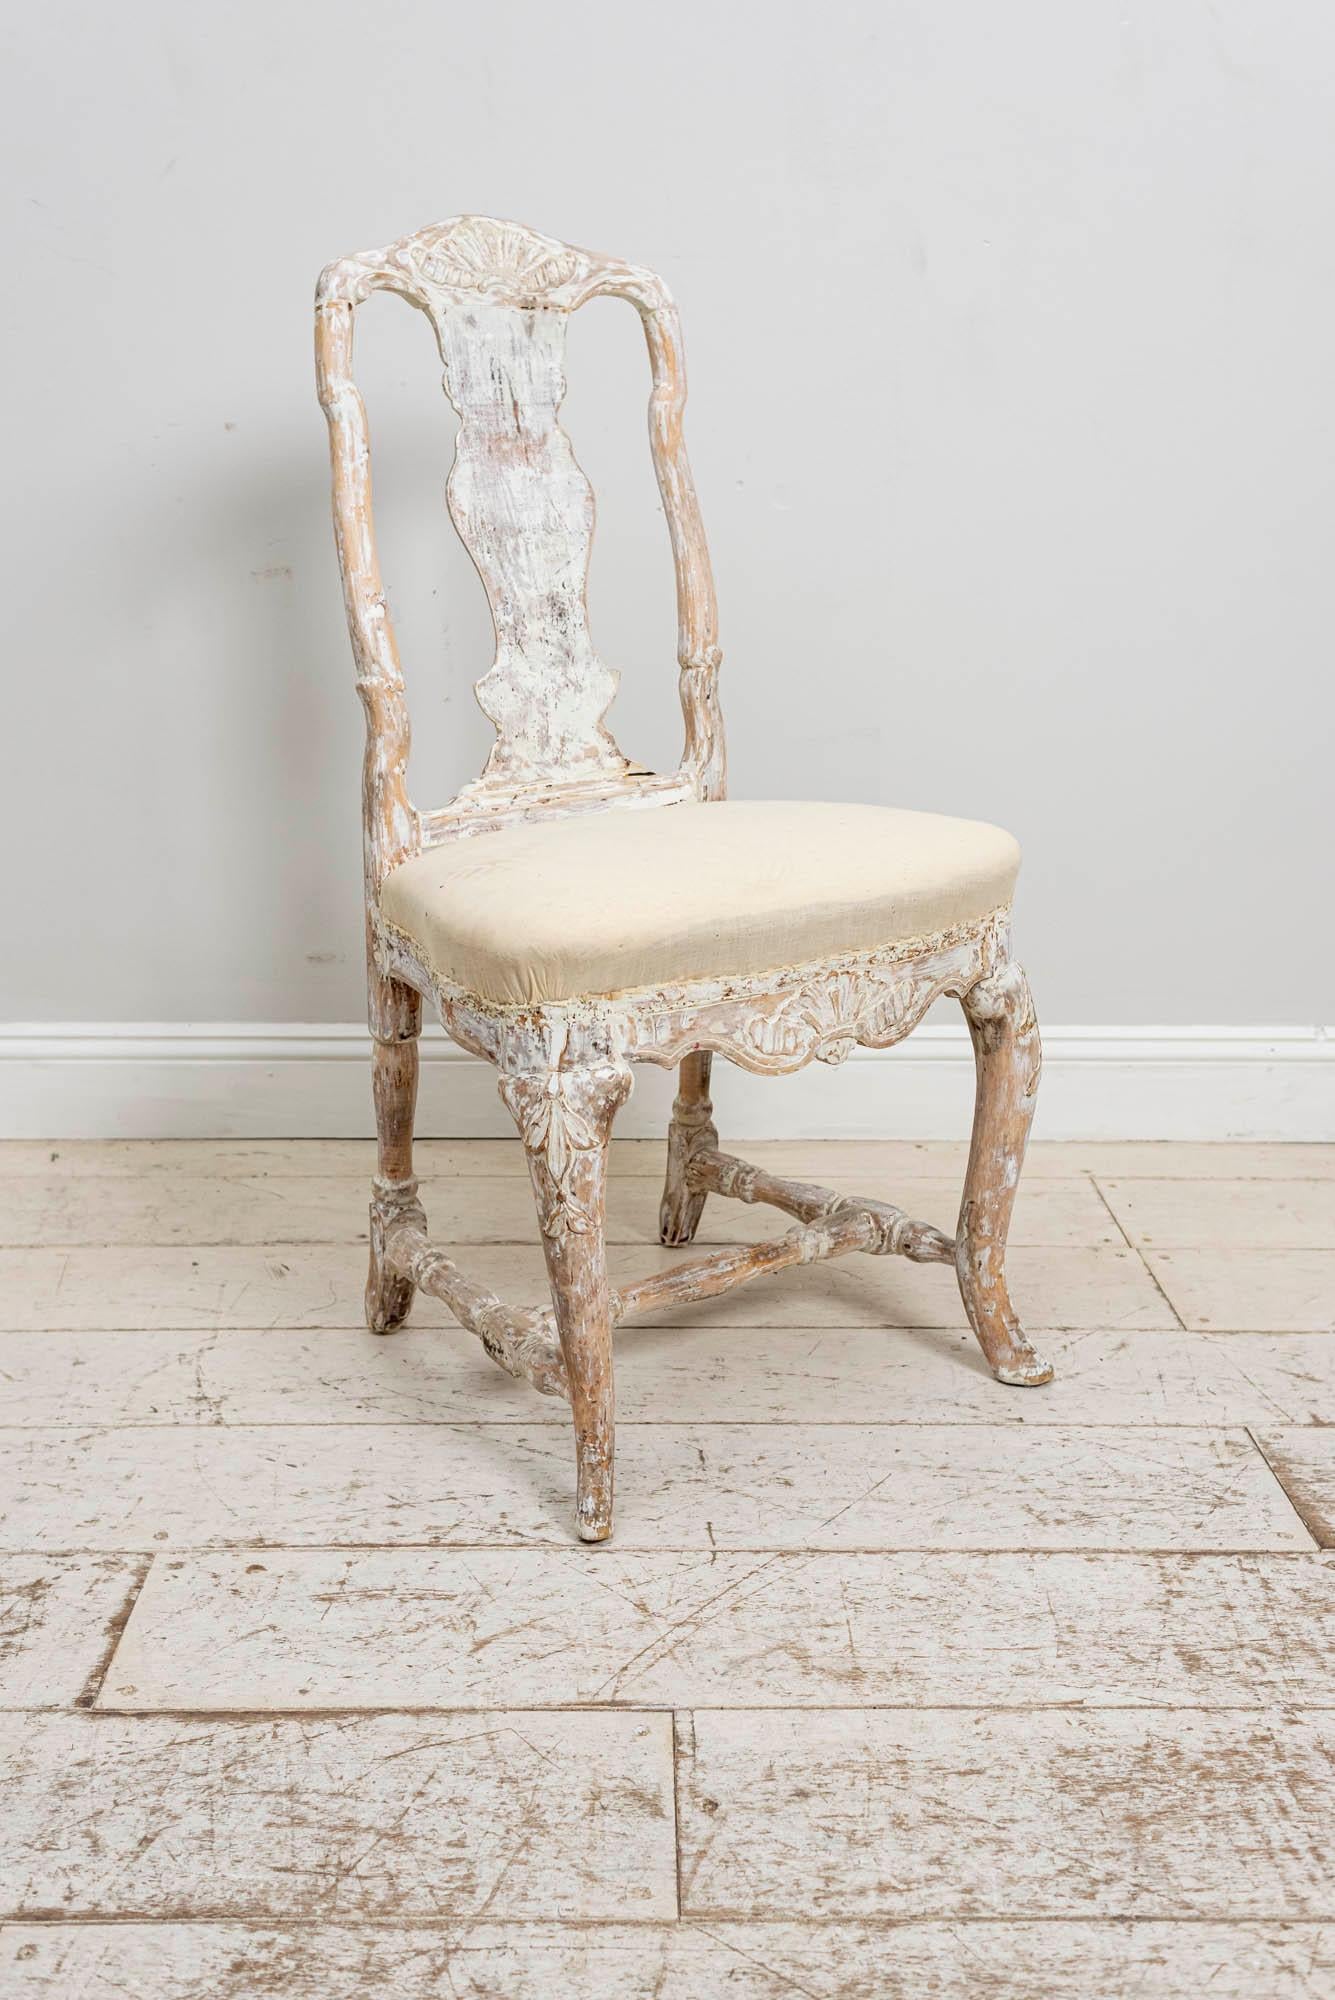 A lovely 18th century Swedish Rococo single chair which is full of original character. It was made in 1760. The chair features carved shell detailing to the front of the seat and back, with trailing leaf detailing to the legs.
It retains traces of